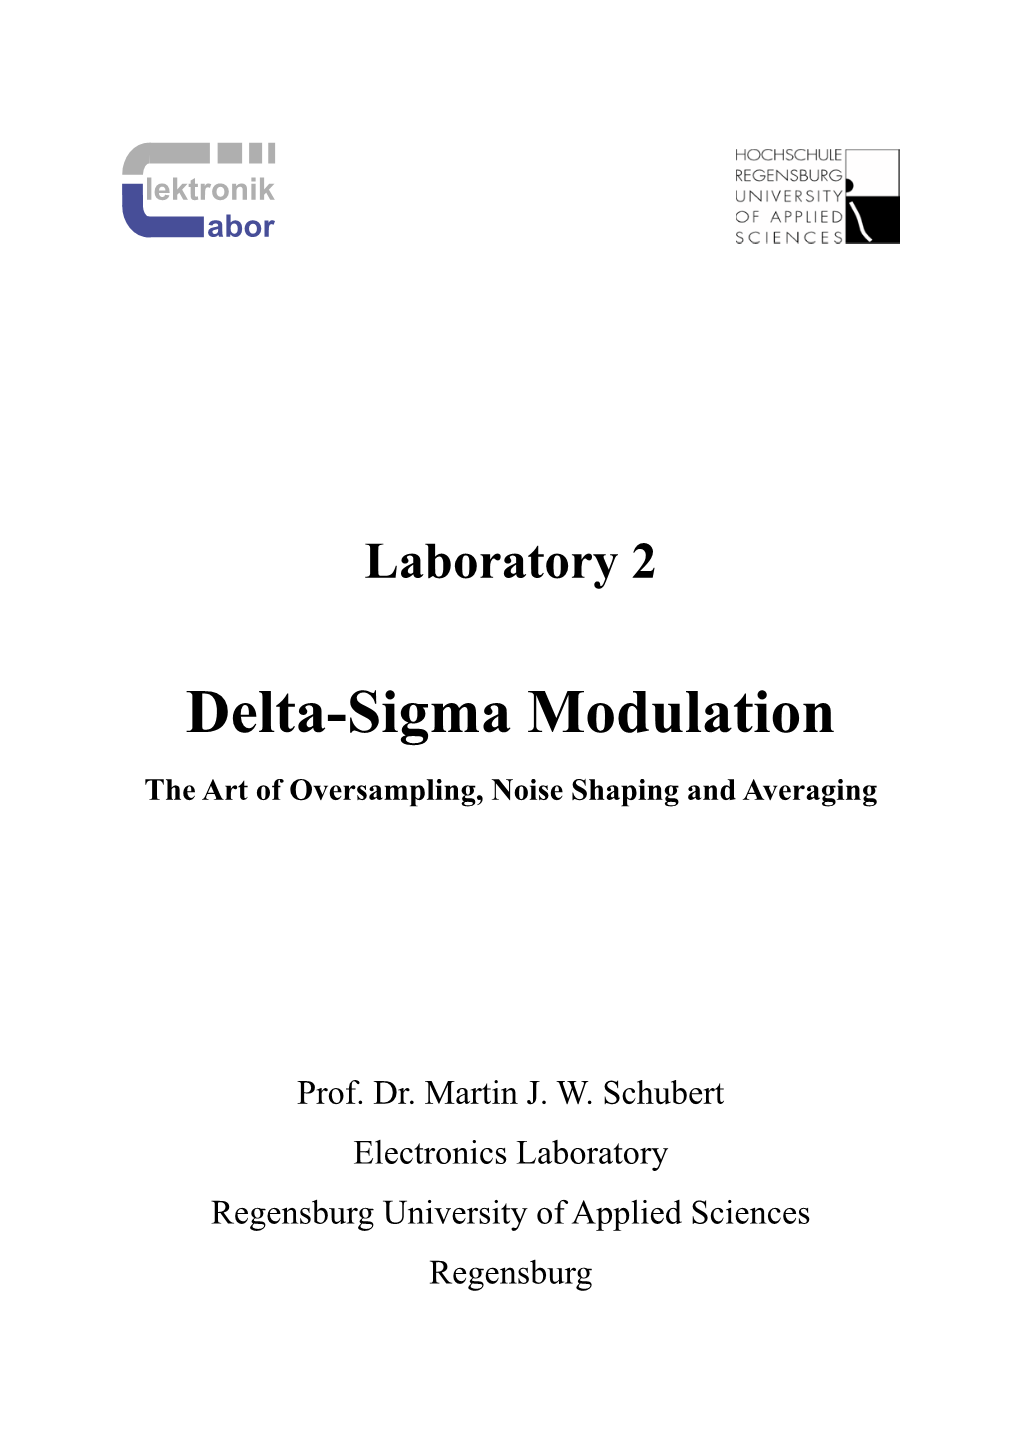 Delta-Sigma Modulation the Art of Oversampling, Noise Shaping and Averaging